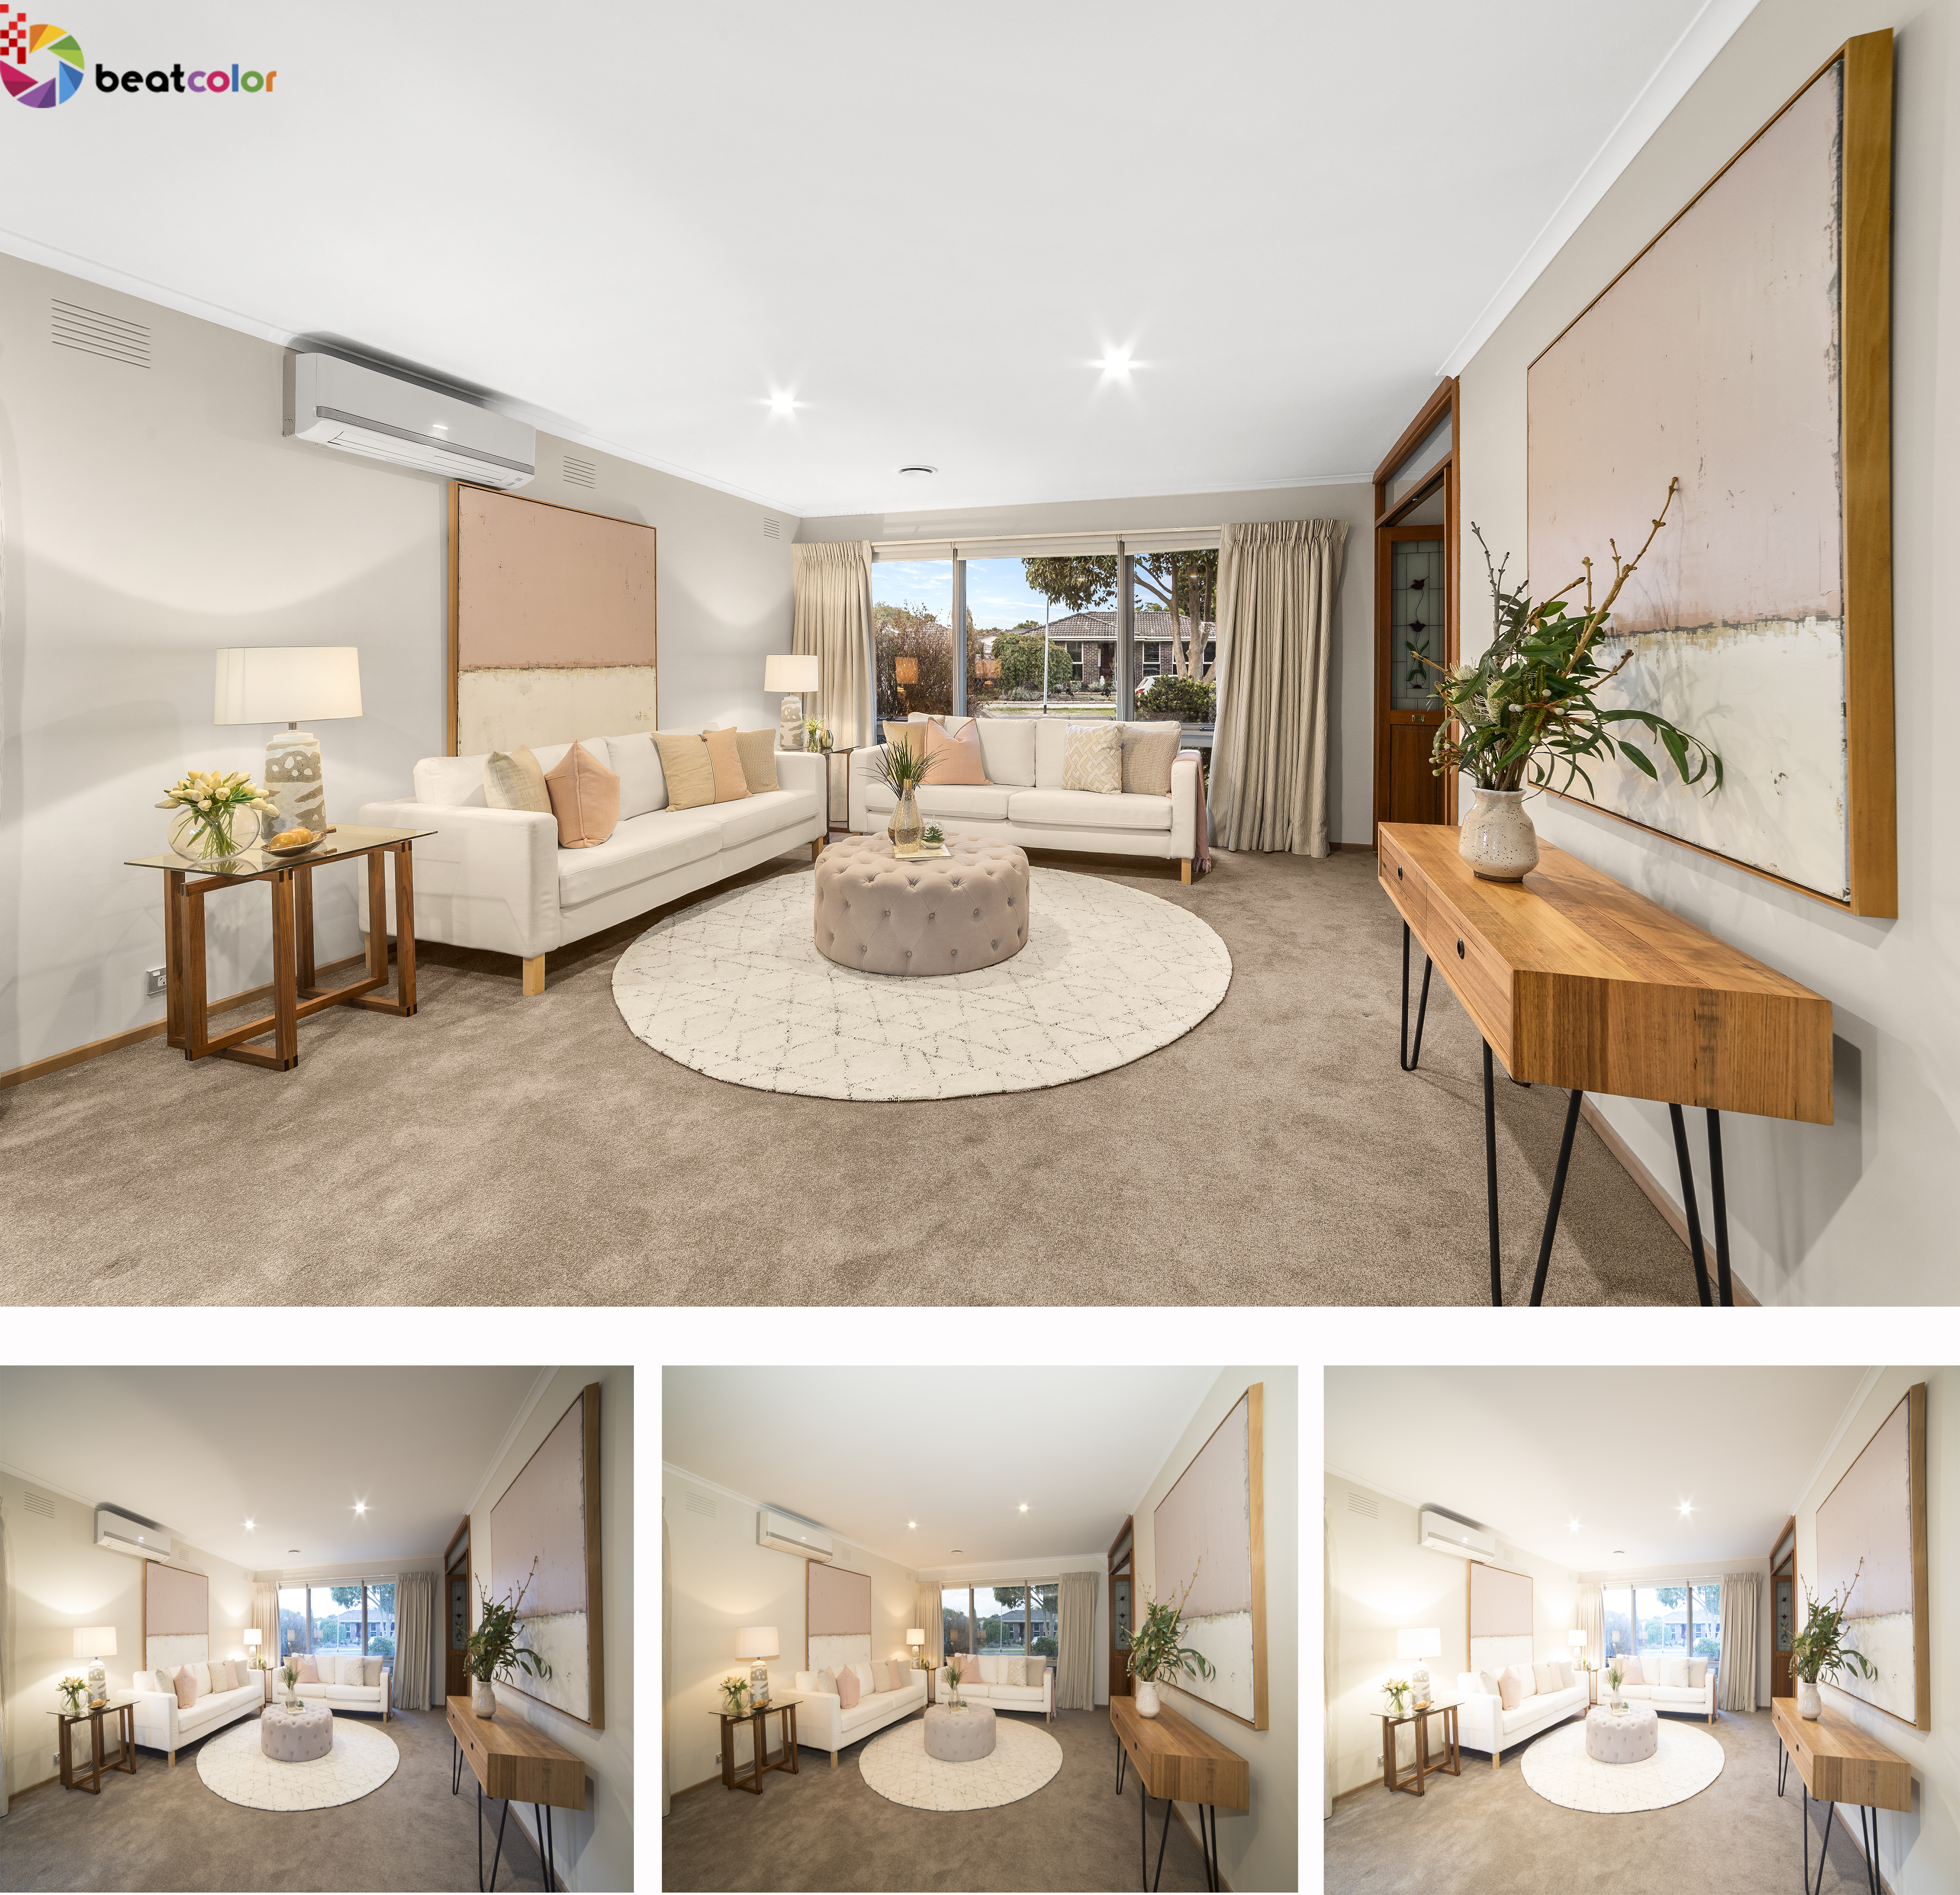 Real Estate Photo Editing Techniques to Improve Property Images